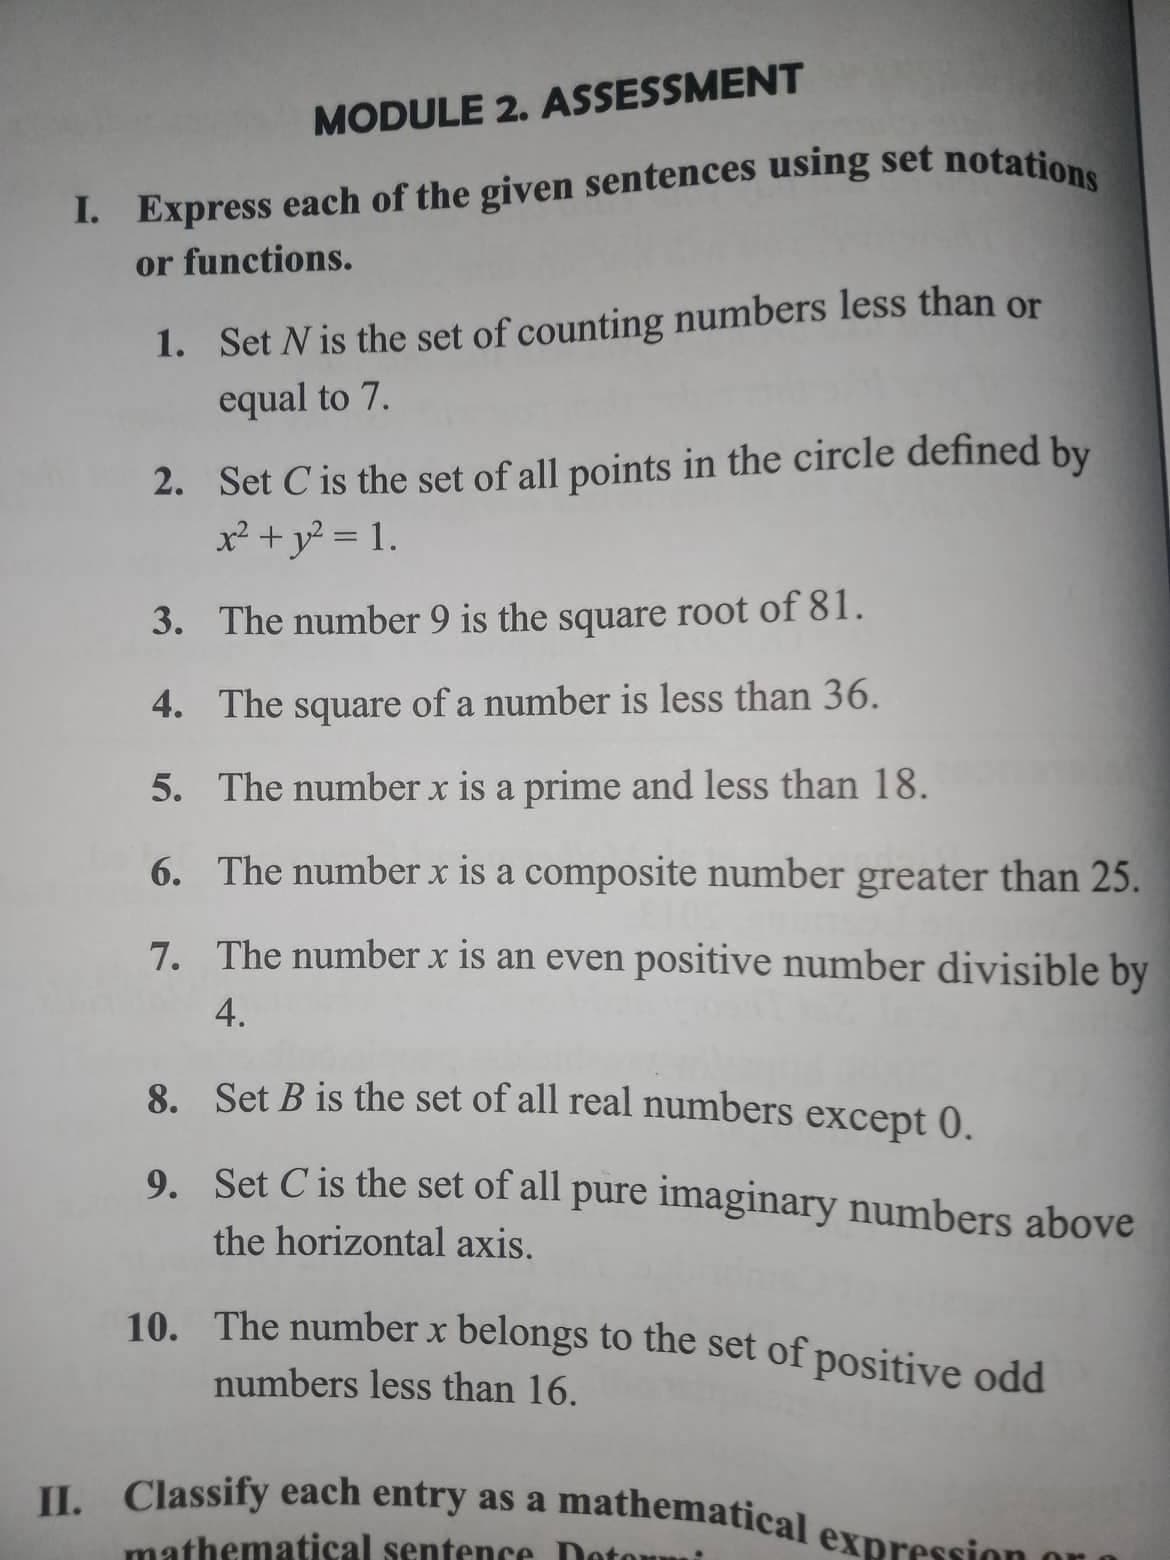 MODULE 2. ASSESSMENT
I. Express each of the given sentences using set notations
or functions.
1. Set N is the set of counting numbers less than or
equal to 7.
2. Set C is the set of all points in the circle defined by
x² + y² = 1.
3.
The number 9 is the square root of 81.
4.
The square of a number is less than 36.
5. The number x is a prime and less than 18.
6.
The number x is a composite number greater than 25.
7. The number x is an even positive number divisible by
4.
8. Set B is the set of all real numbers except 0.
9. Set C is the set of all pure imaginary numbers above
the horizontal axis.
10. The number x belongs to the set of positive odd
numbers less than 16.
II. Classify each entry as a mathematical exp